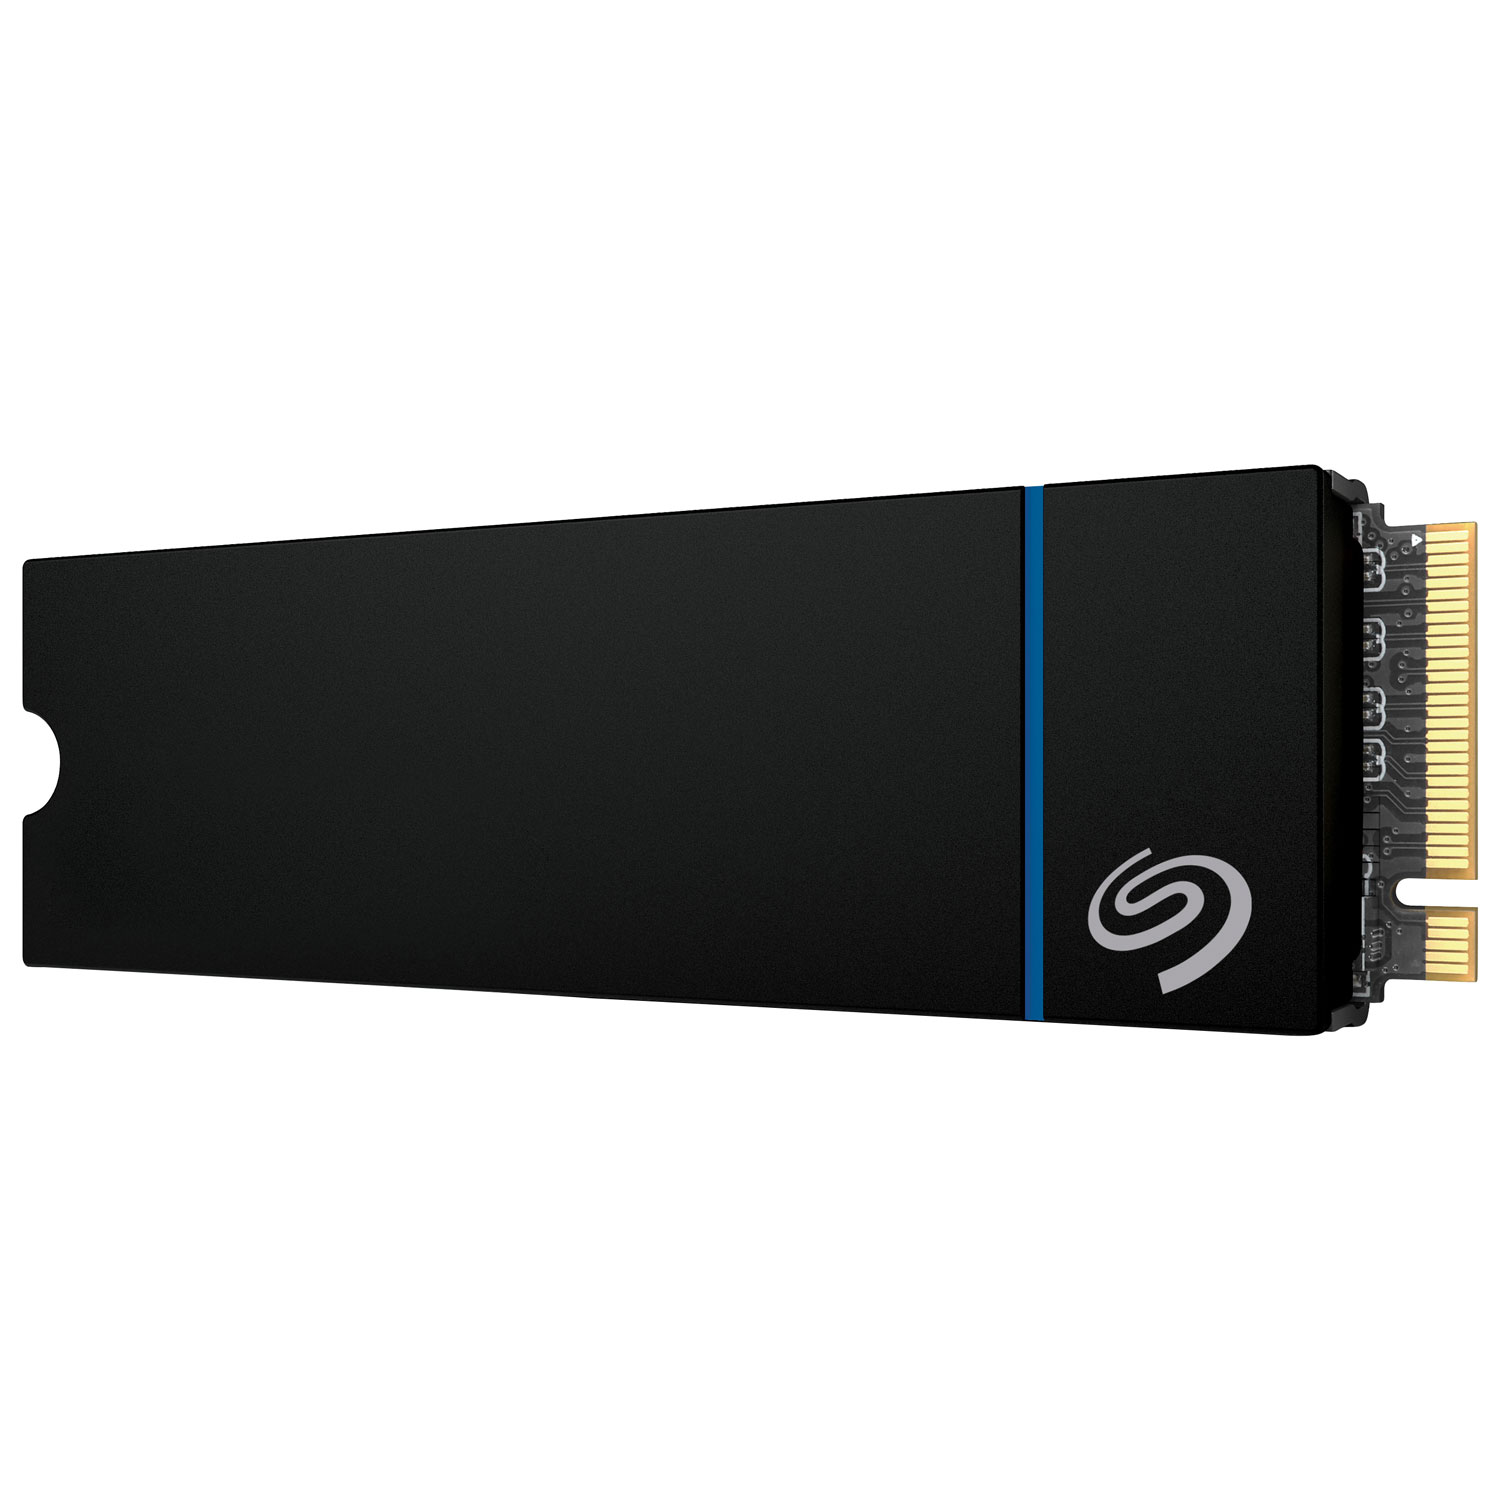 Seagate Game Drive 1TB NVMe M.2 PCI-e Internal Solid State Drive with Heatsink for PS5